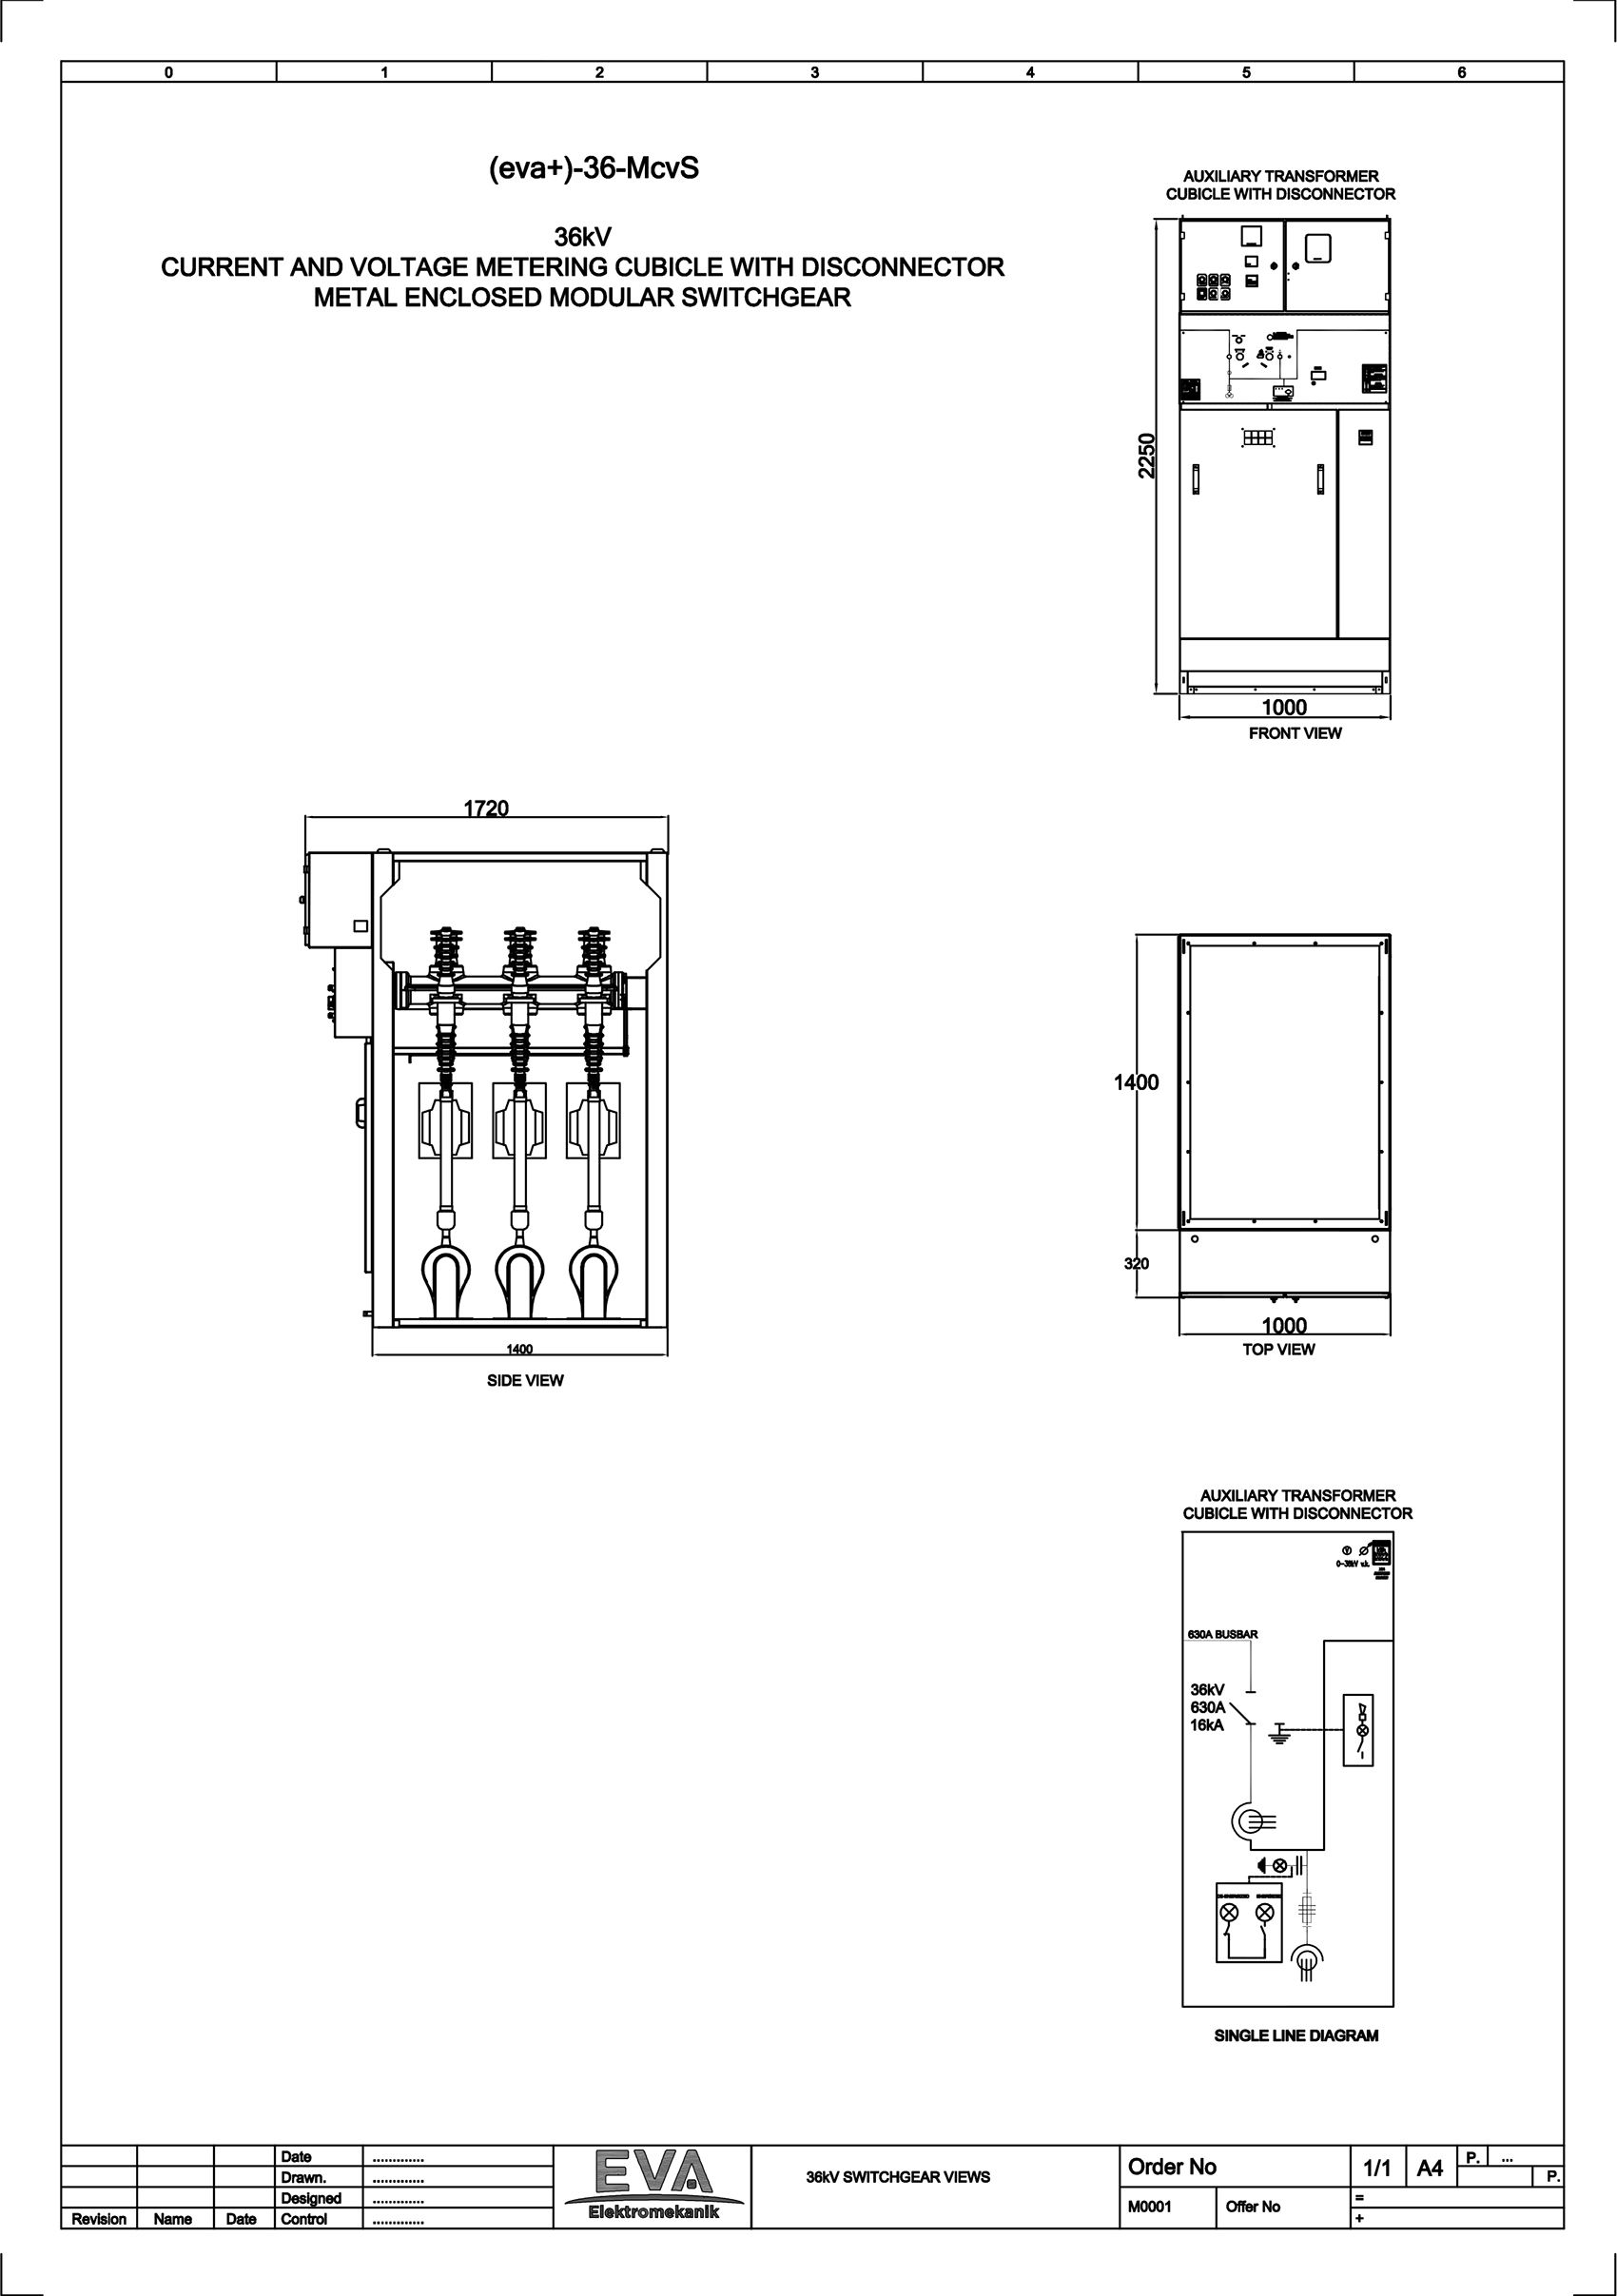 Current and Voltage Metering Cubicle with Disconnector	